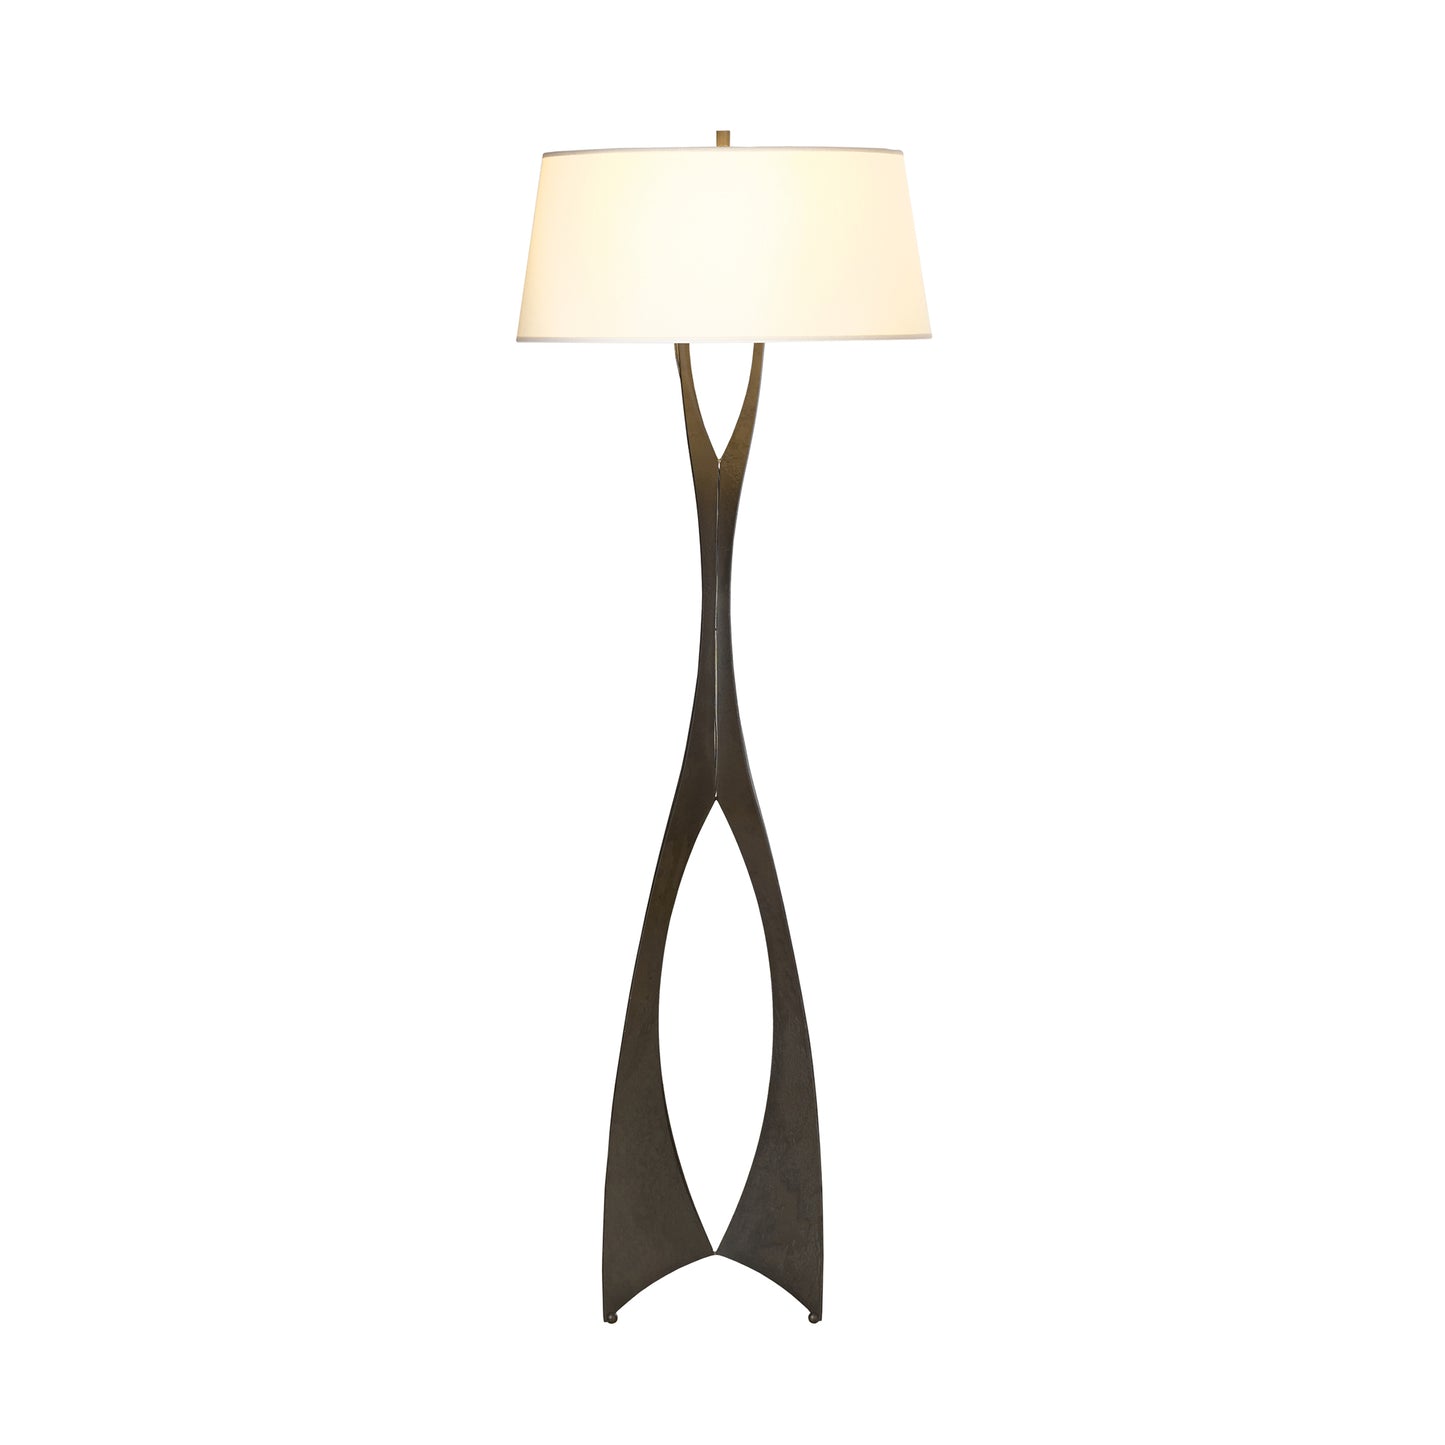 A Hubbardton Forge Moreau Floor Lamp with a unique twisted base design in a metal finish, supporting a large, horizontal white lampshade, isolated on a white background.